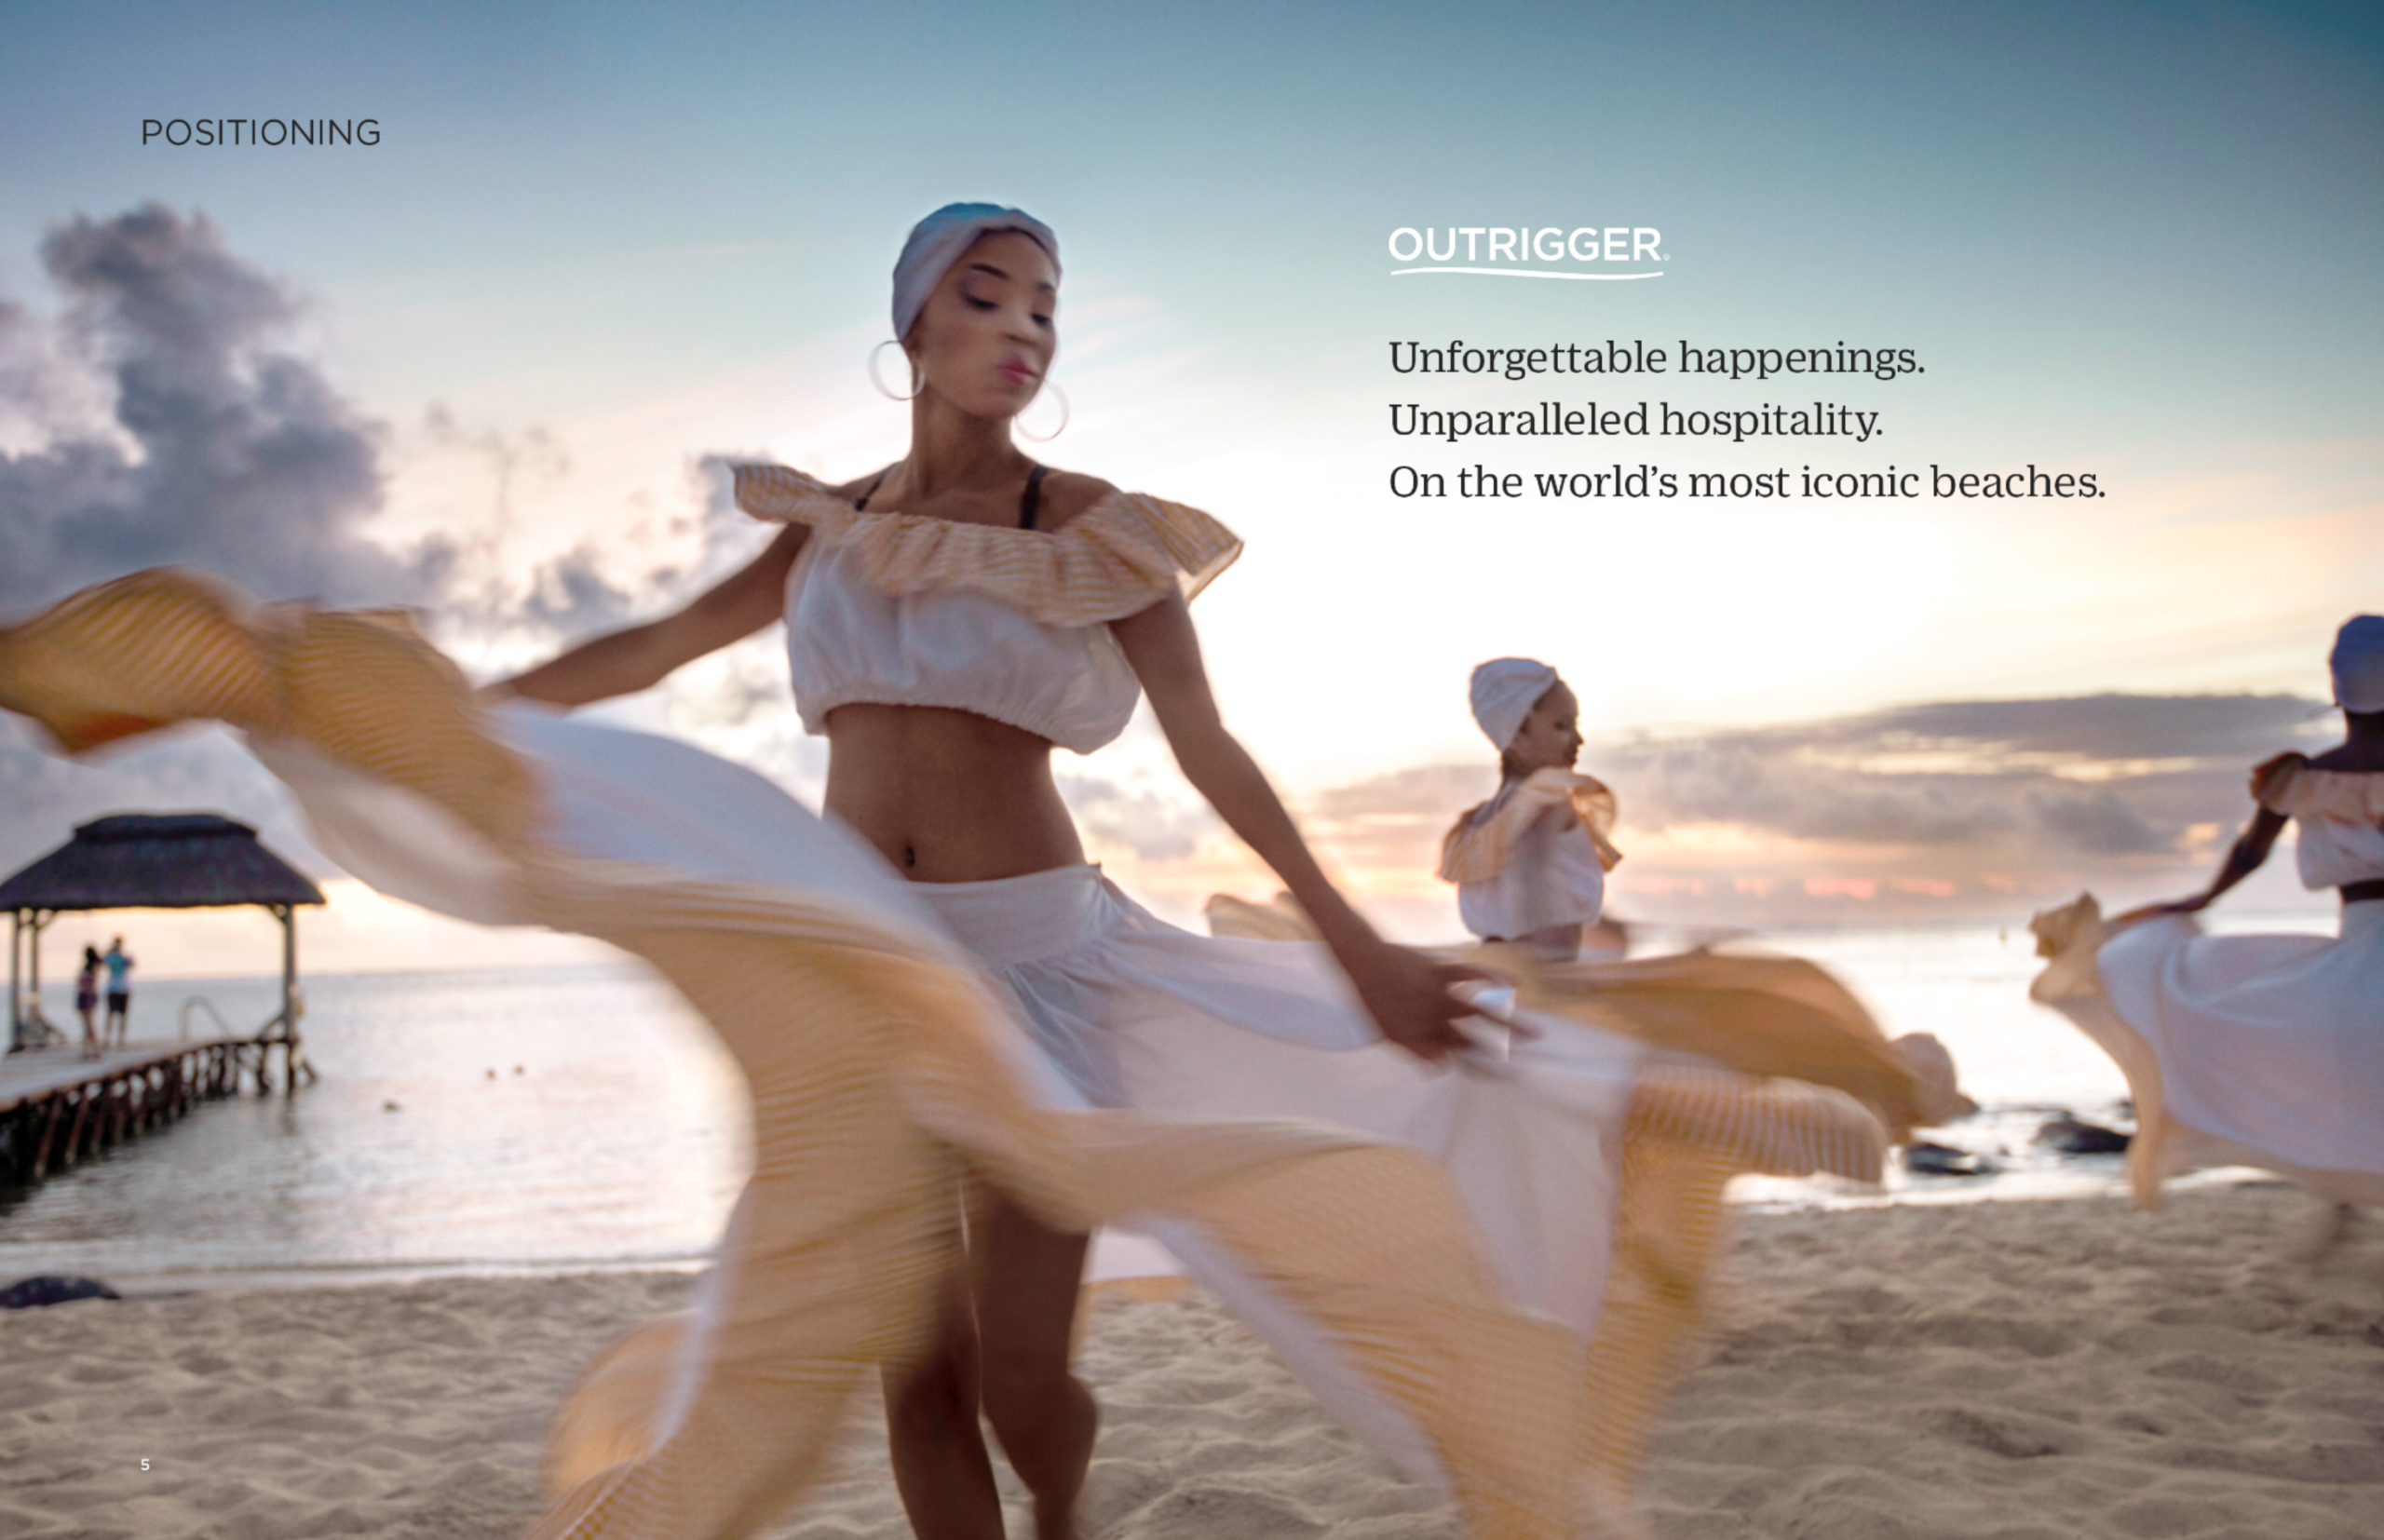 Image of three people dancing in off-white flowing two-piece dresses on the beach, person in foreground has a white scarf on head with large hoop earrings, you can see a wooden pier in the background left and the sun is starting to set; copy on upper right reads: “Outrigger, Unforgettable happenings. Unparalleled hospitality. On the world’s most iconic beaches.